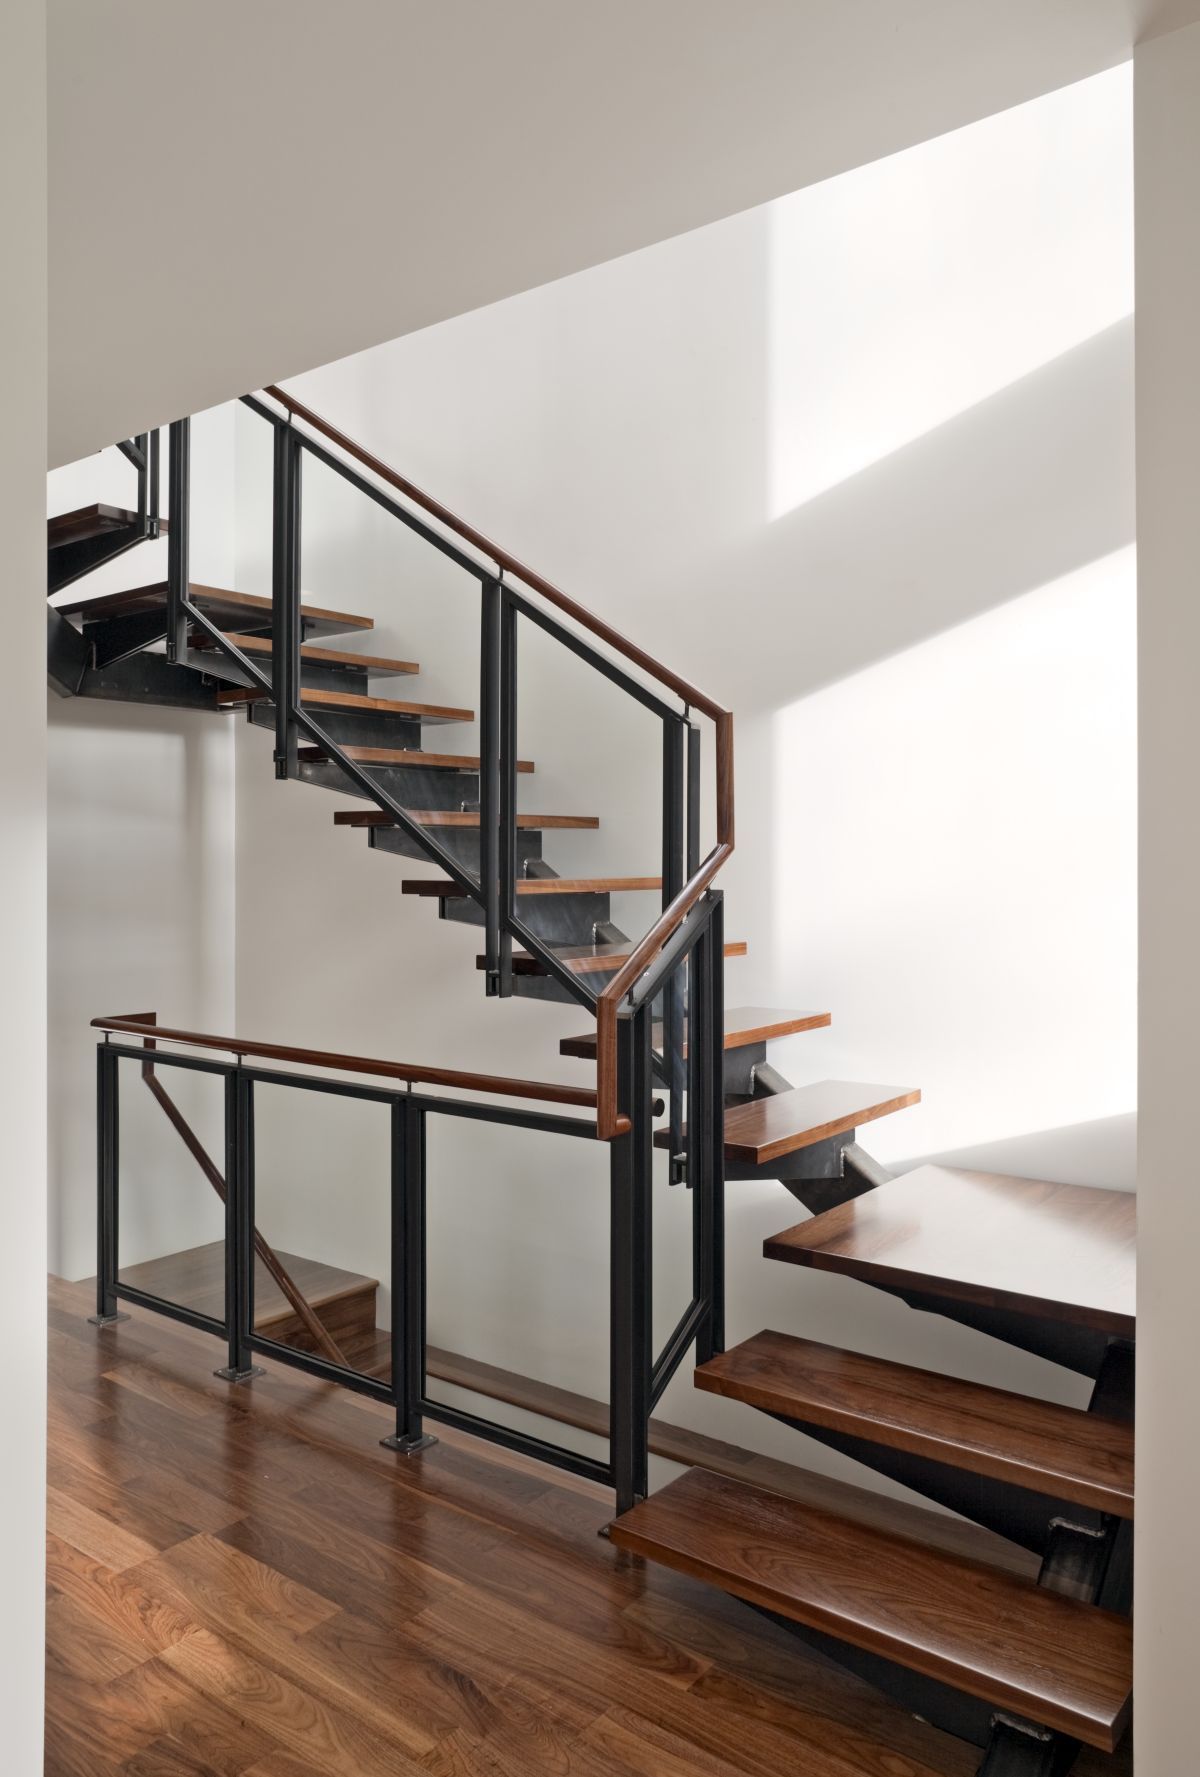 Regal Glass Banister Stairs With Black Iron Frame As Inspiring ...